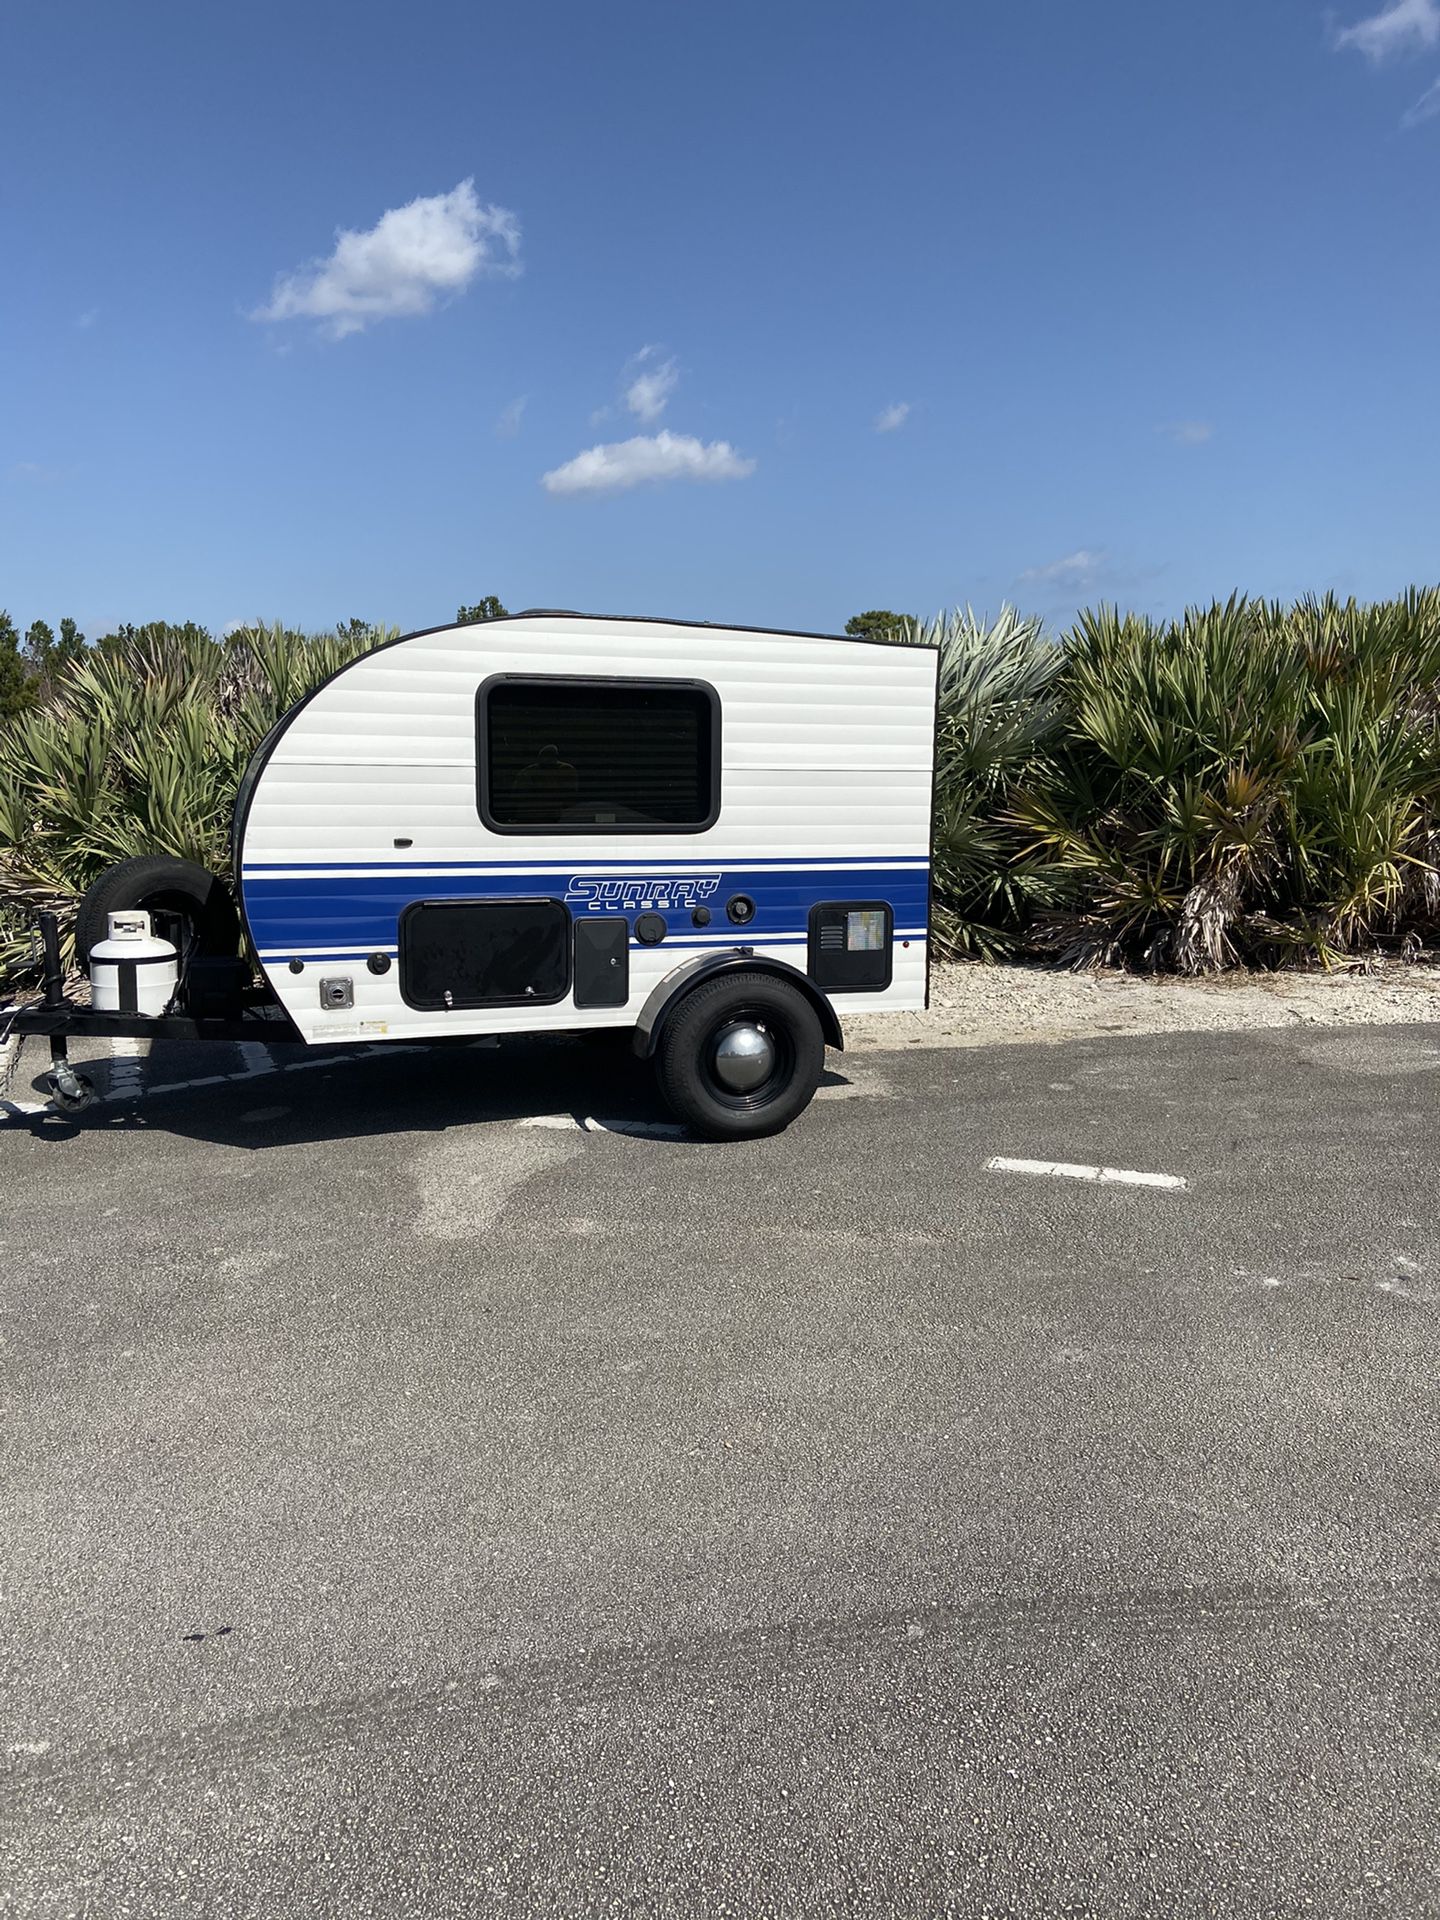 2019 sunset Classic sunray towable Rv camper